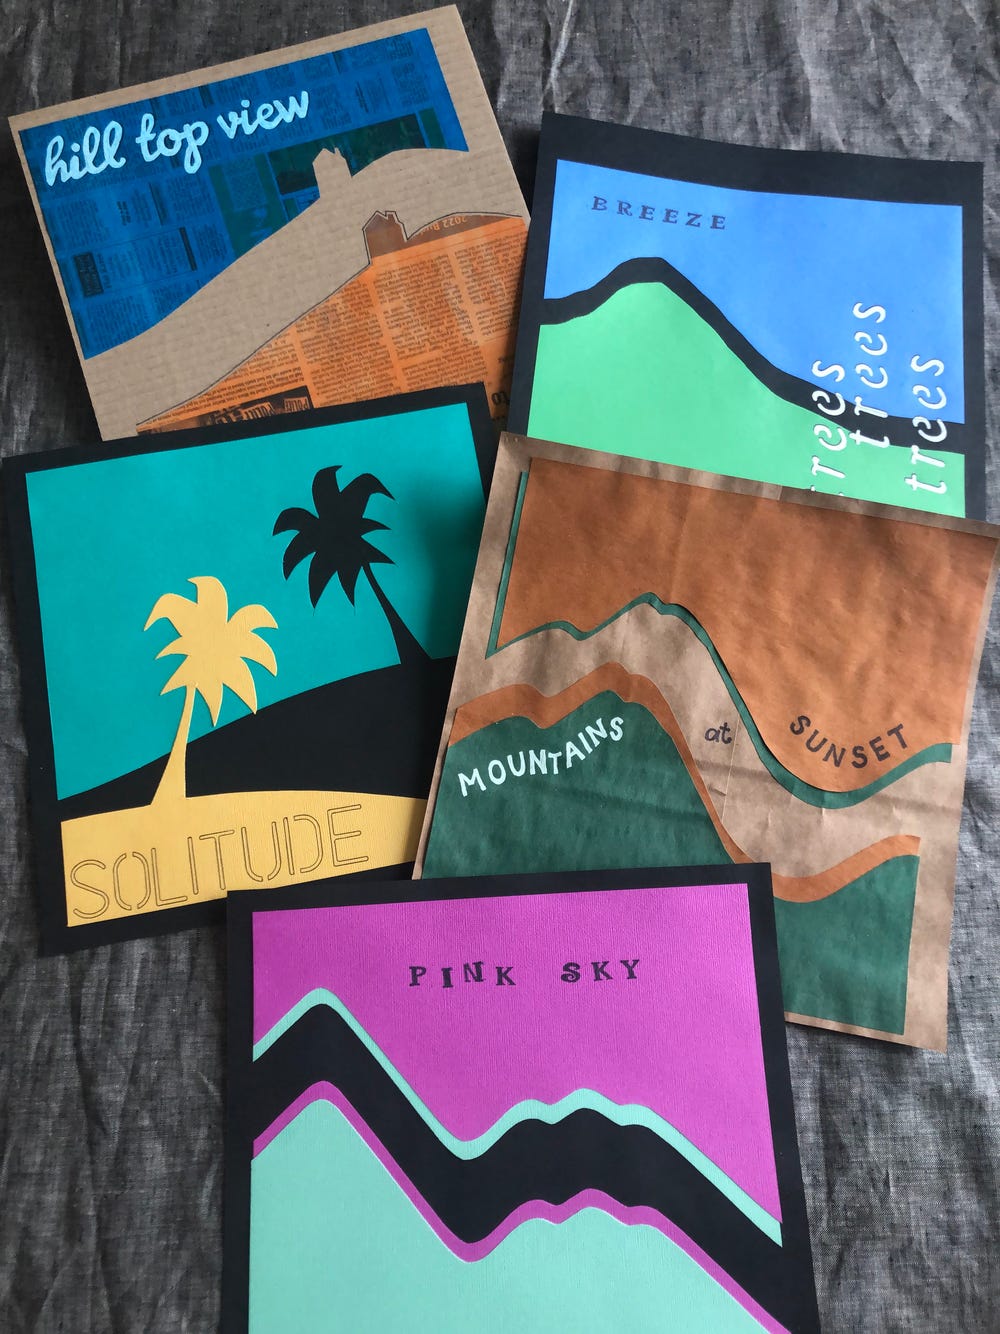 de Youngsters Studio: horizon line collage inspired by Ed Ruscha